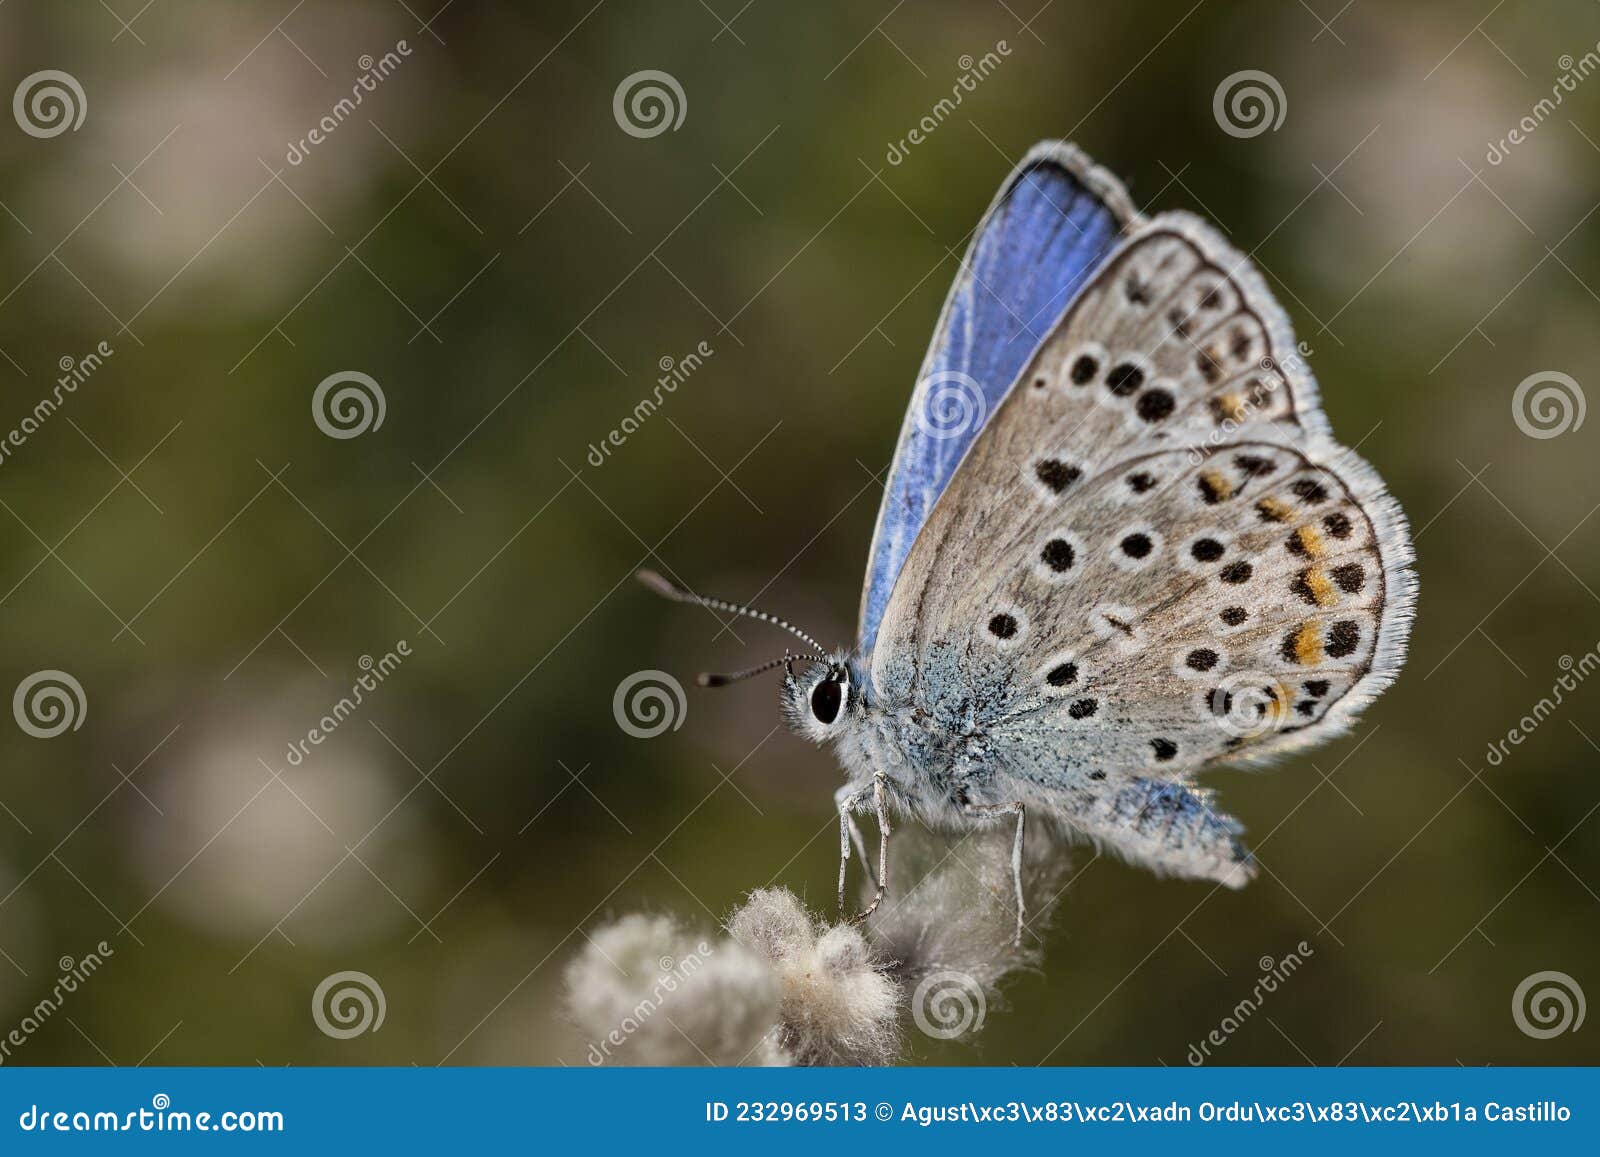 day butterfly perched on flower, plebejus argus - linnaeus